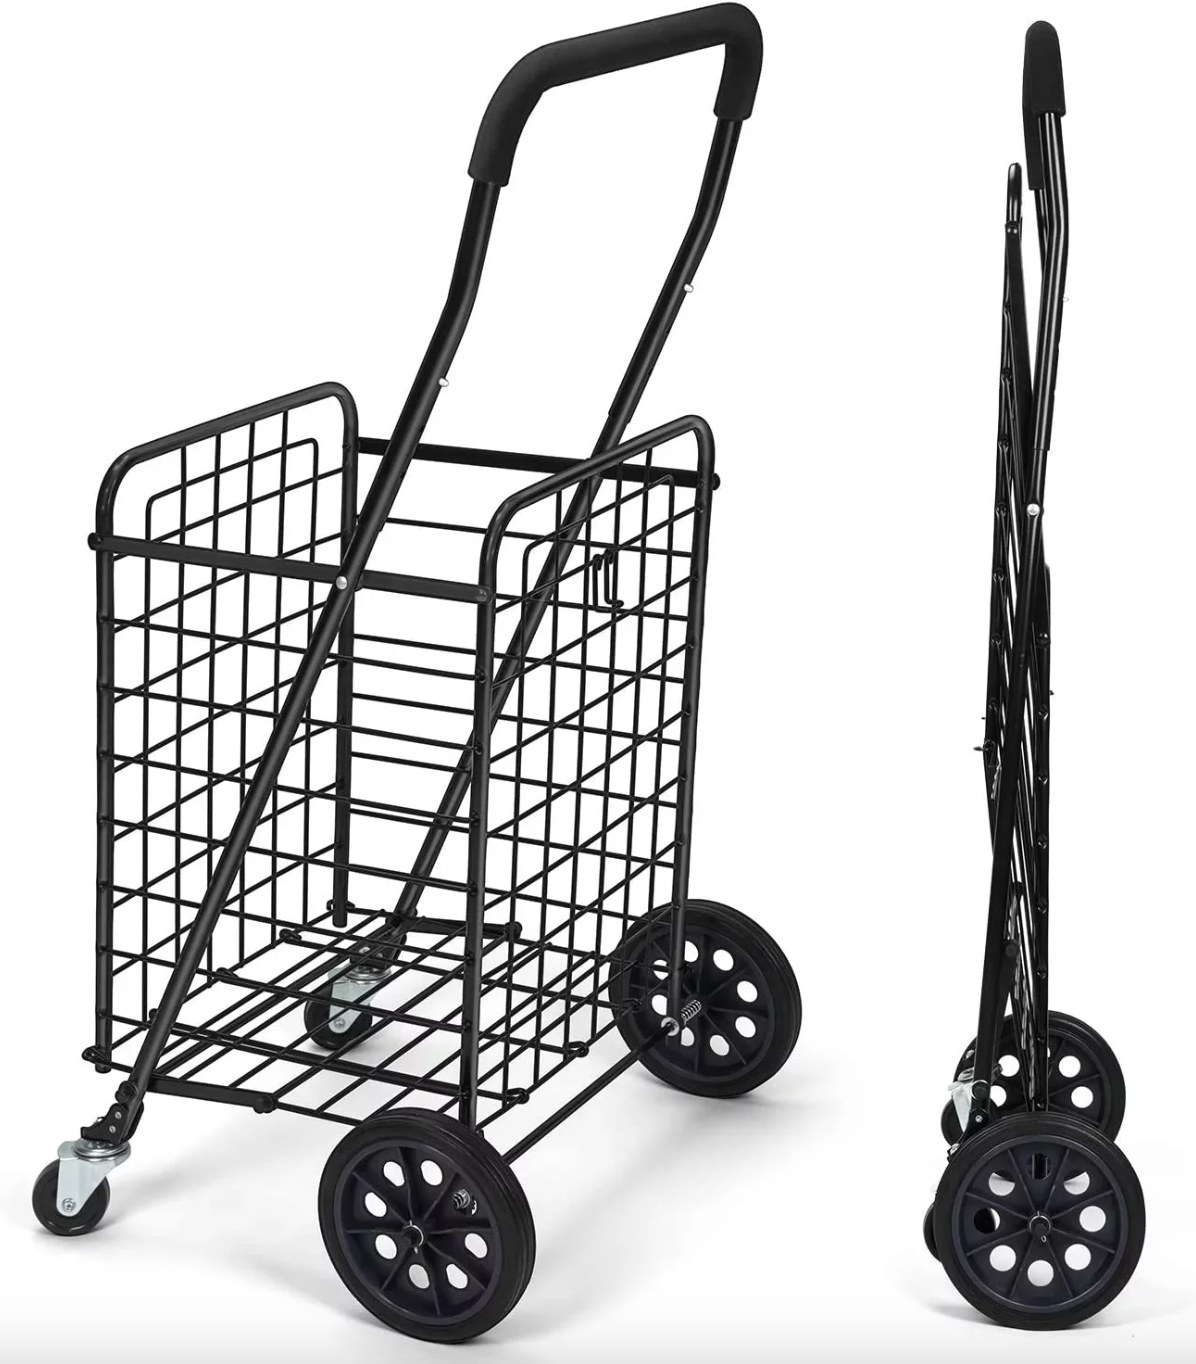 the black metal cart with four wheels, shown both expanded and folded flat